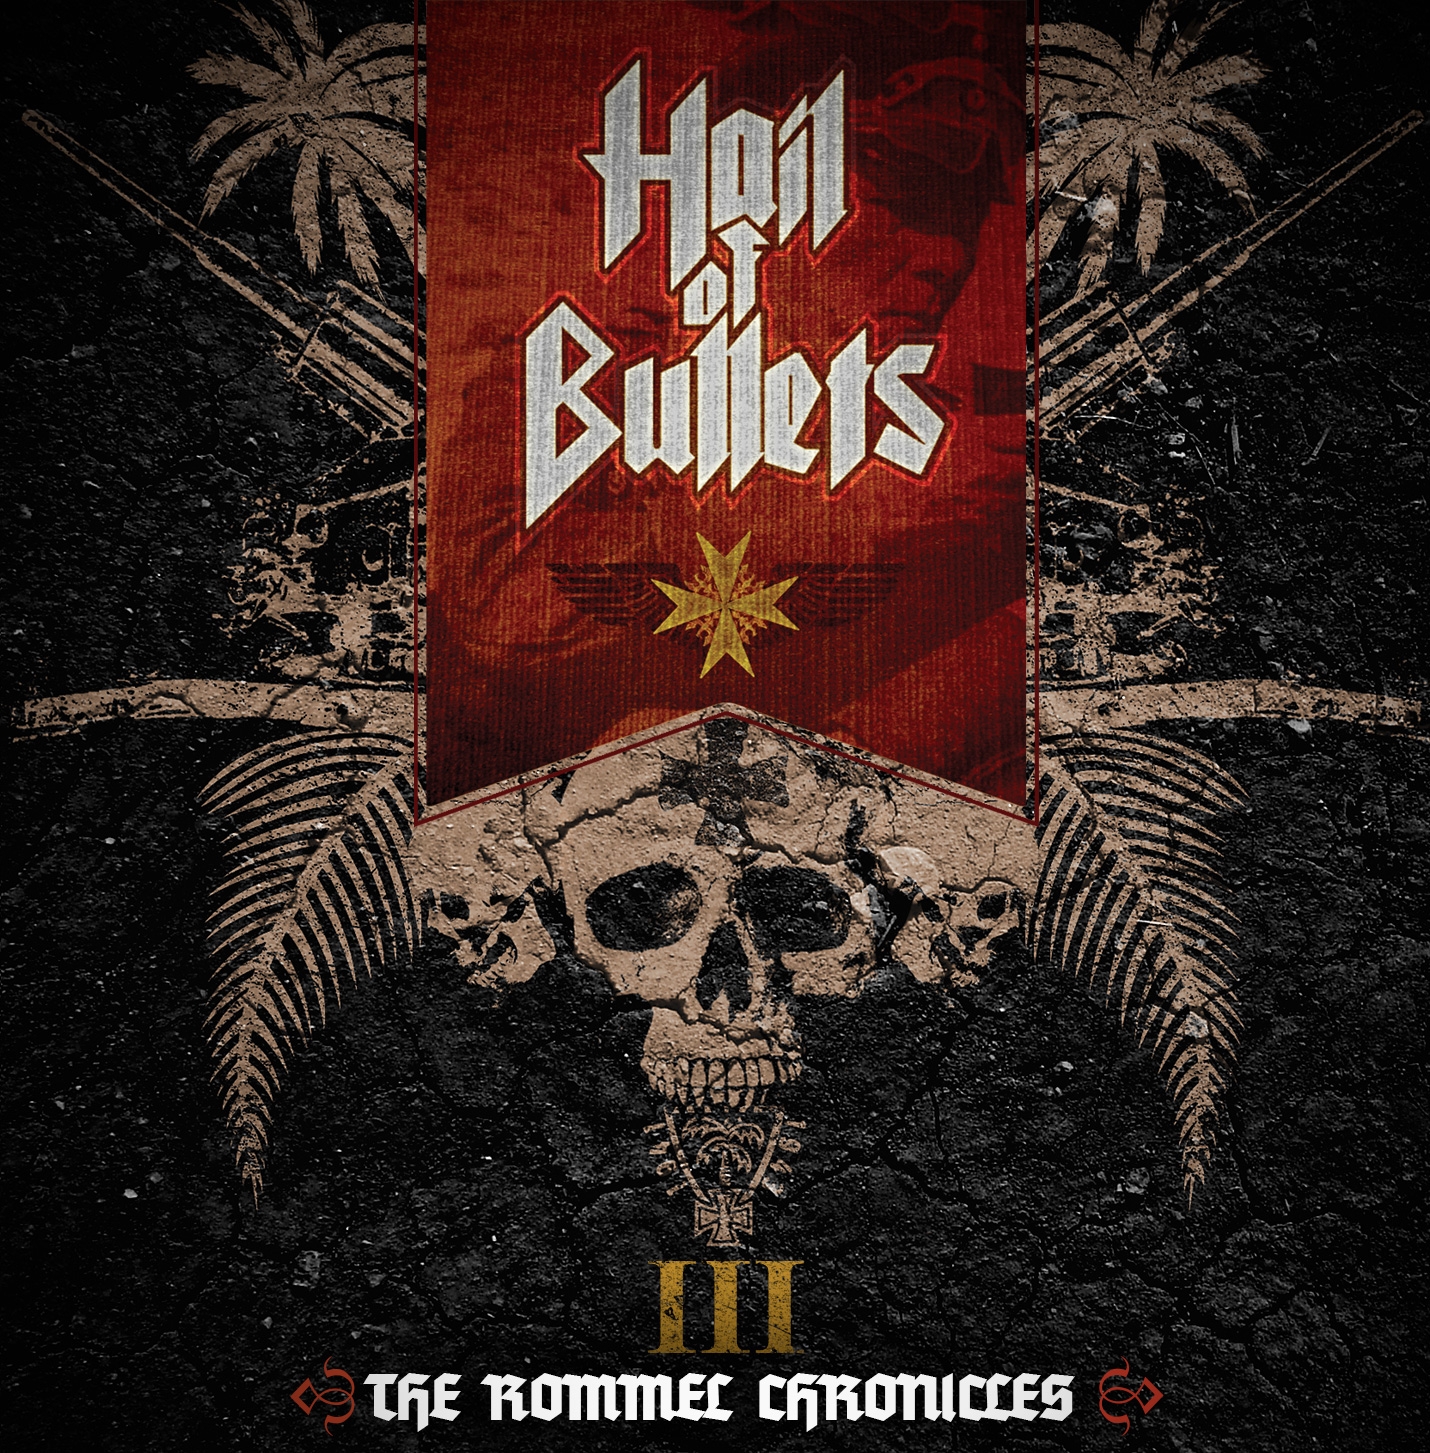 Hail of Bullets – III The Rommel Chronicles Review